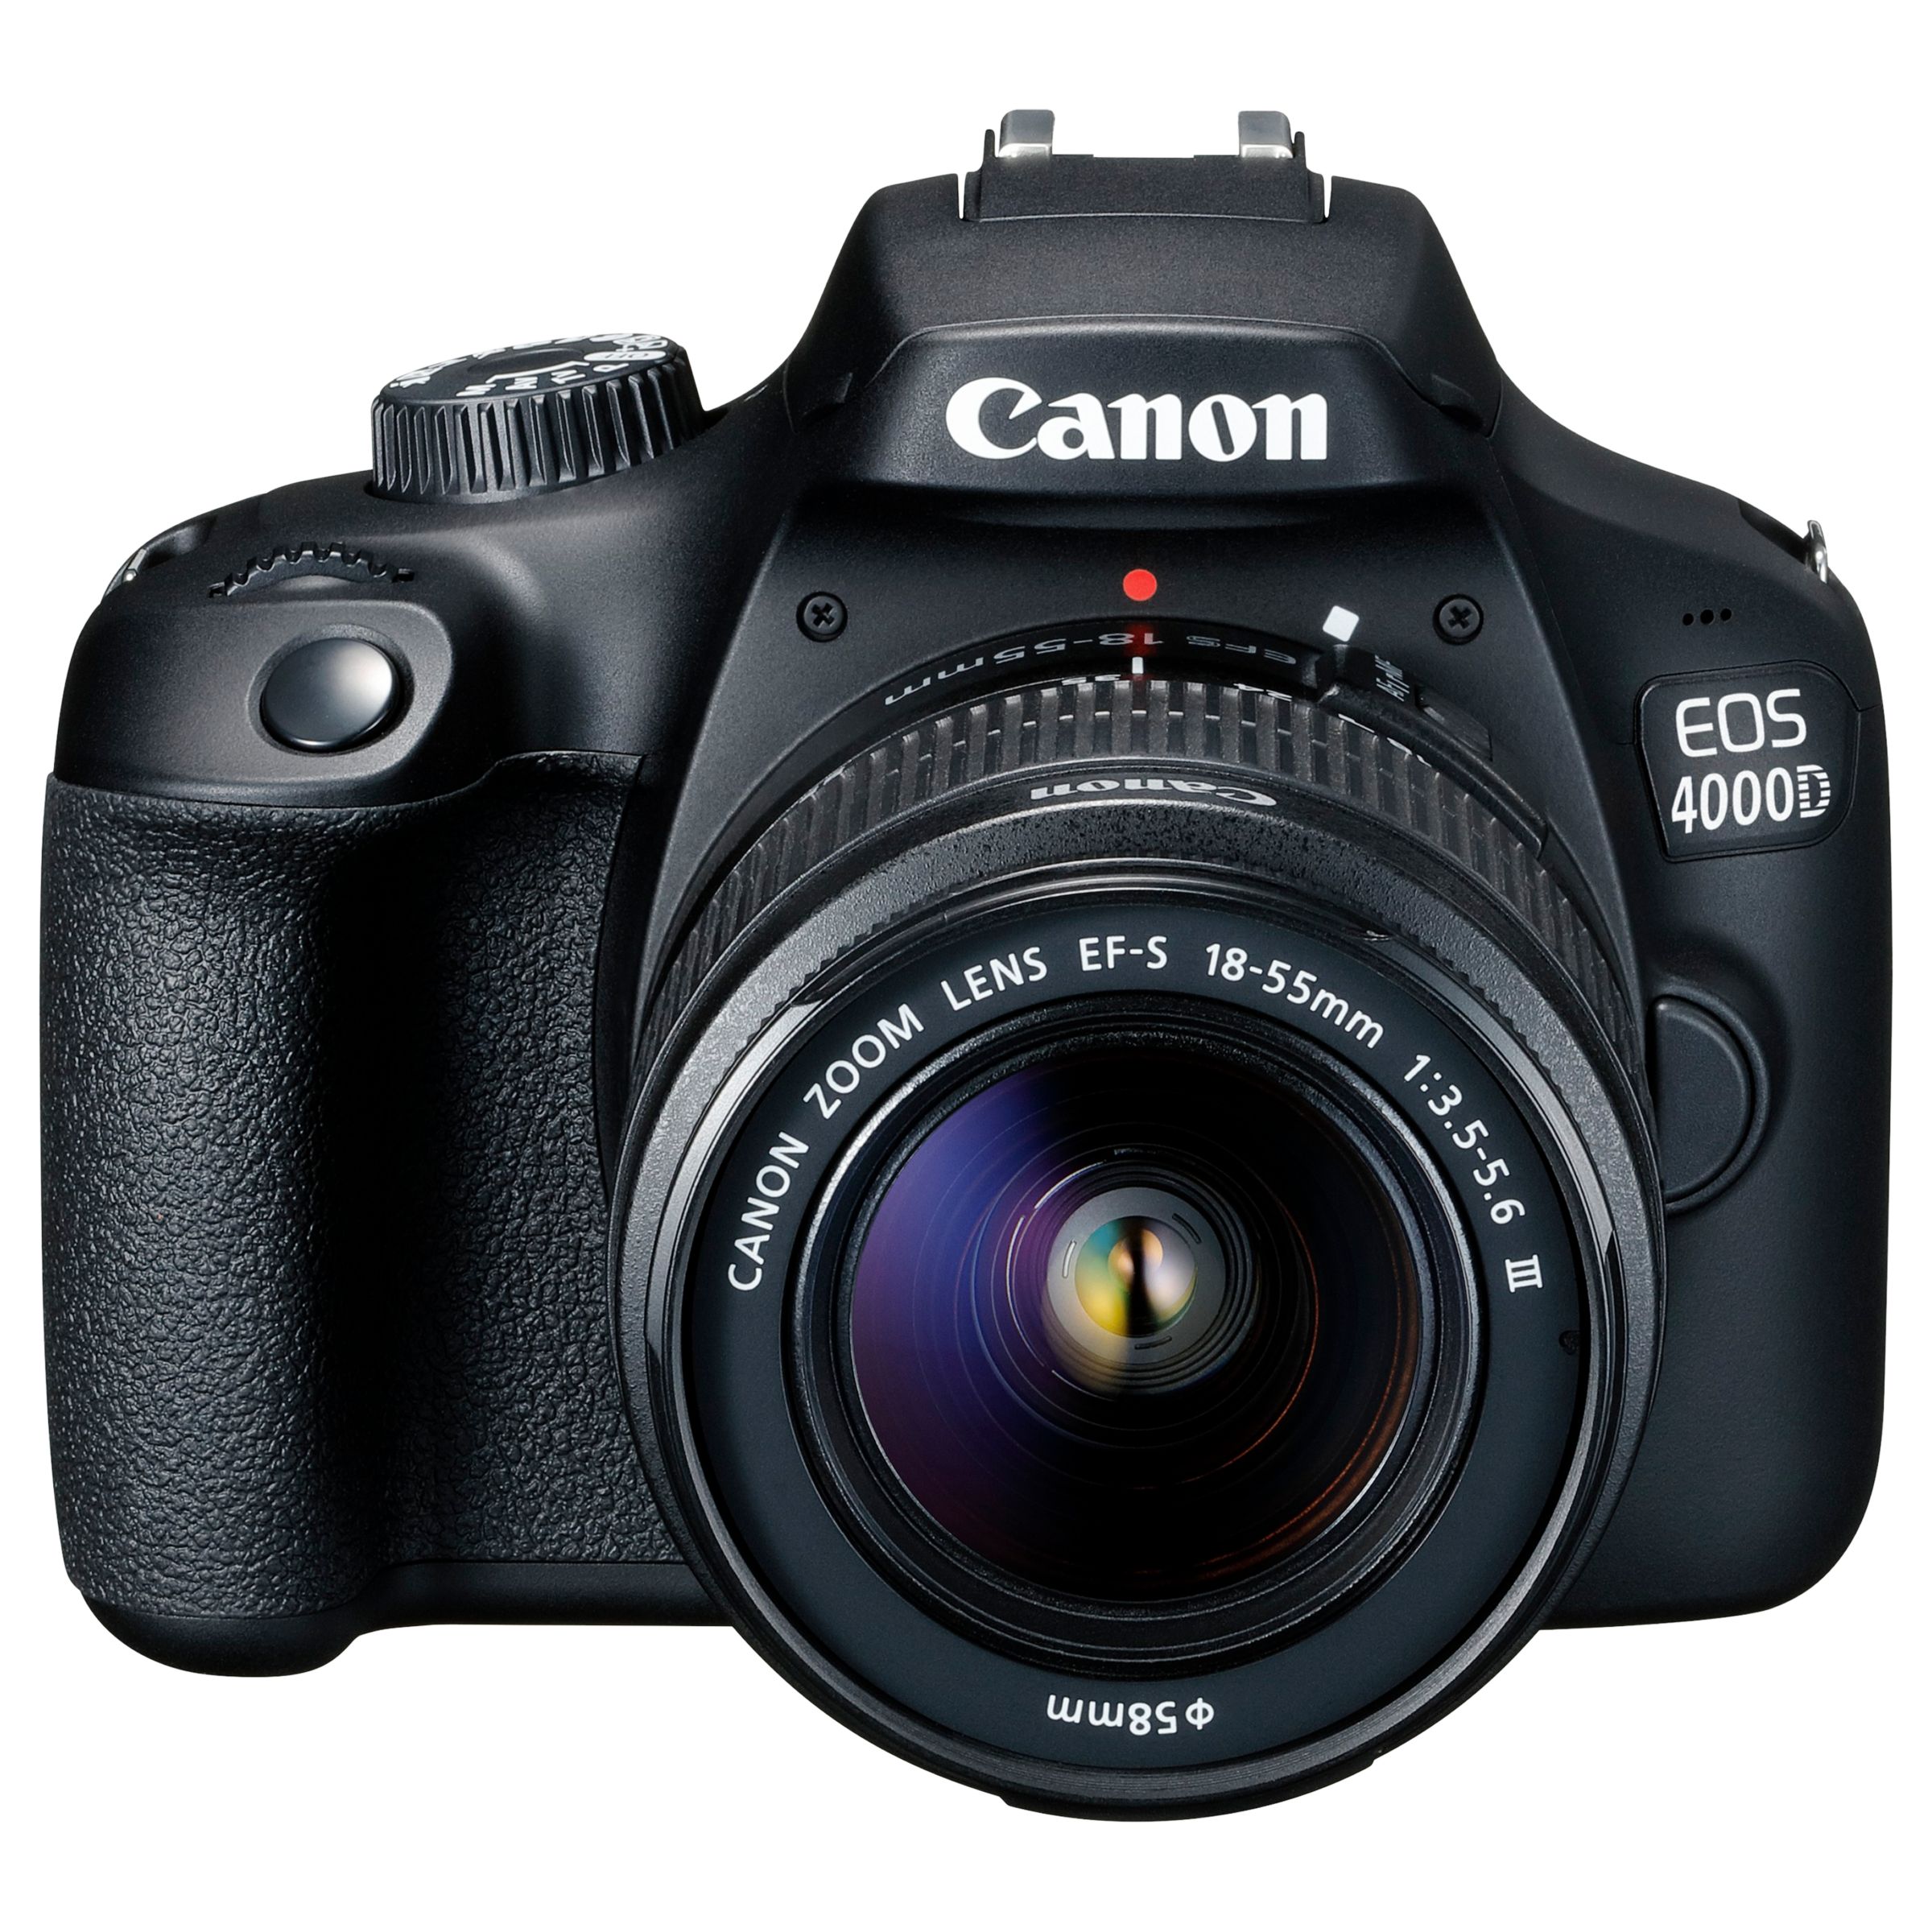 Canon EOS 4000D Camera with 18-55mm f/3.5-5.6 1080p Full HD, Wi-Fi, Optical Viewfinder, 2.7" LCD Screen, Black